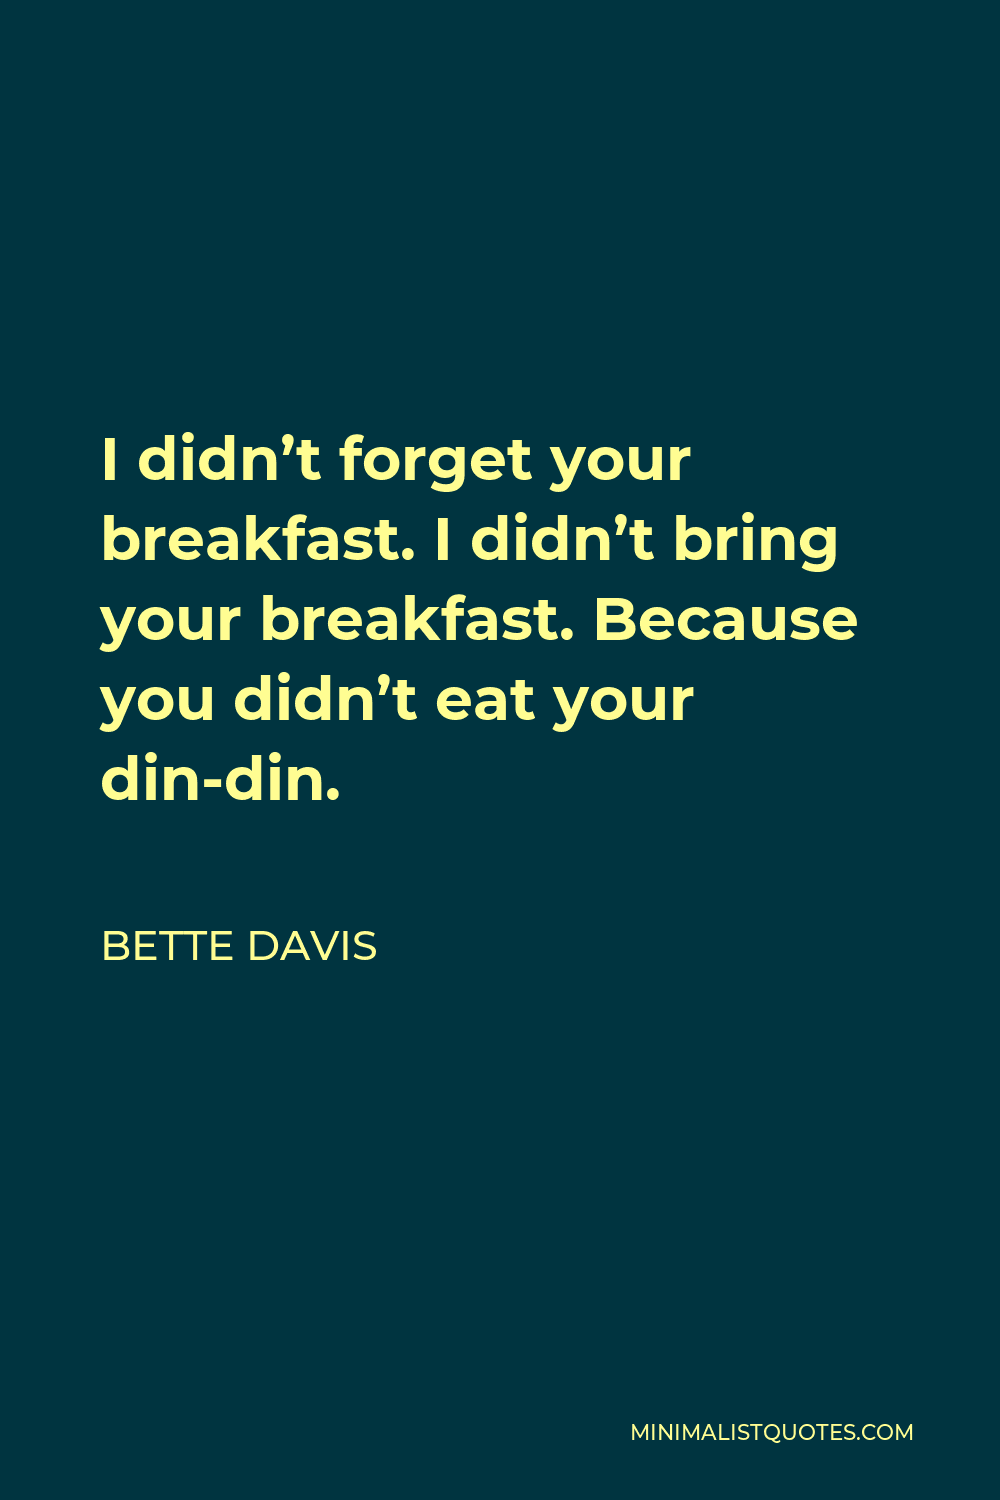 Bette Davis Quote - I didn’t forget your breakfast. I didn’t bring your breakfast. Because you didn’t eat your din-din.